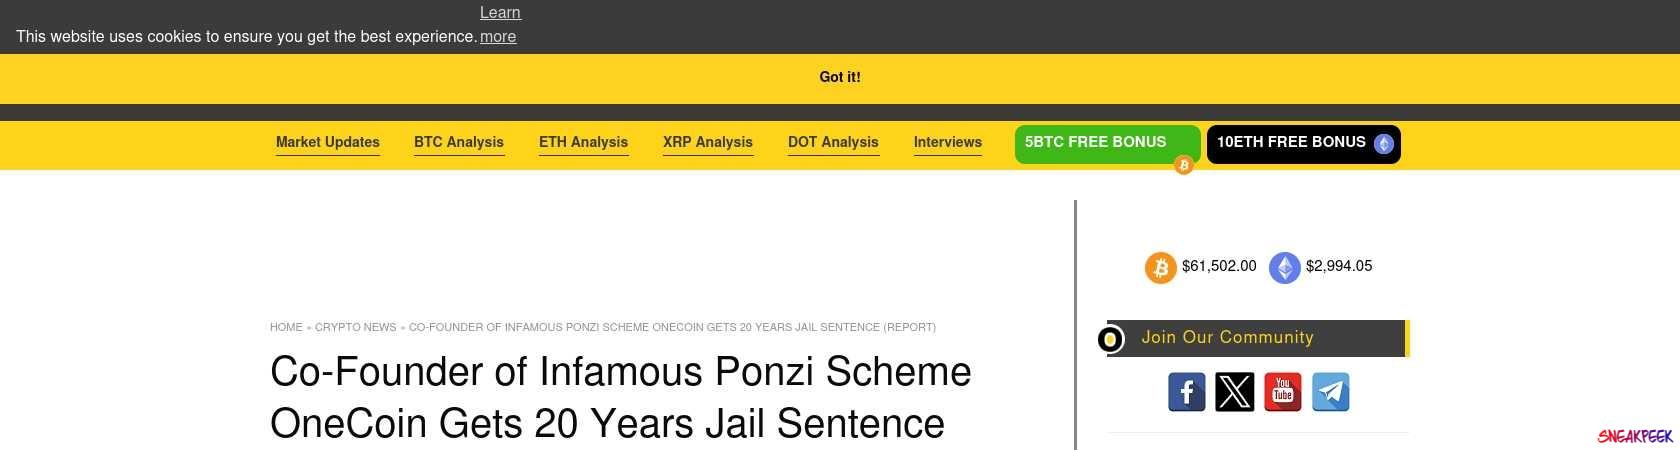 Read the full Article:  ⭲ Co-Founder of Infamous Ponzi Scheme OneCoin Gets 20 Years Jail Sentence (Report)